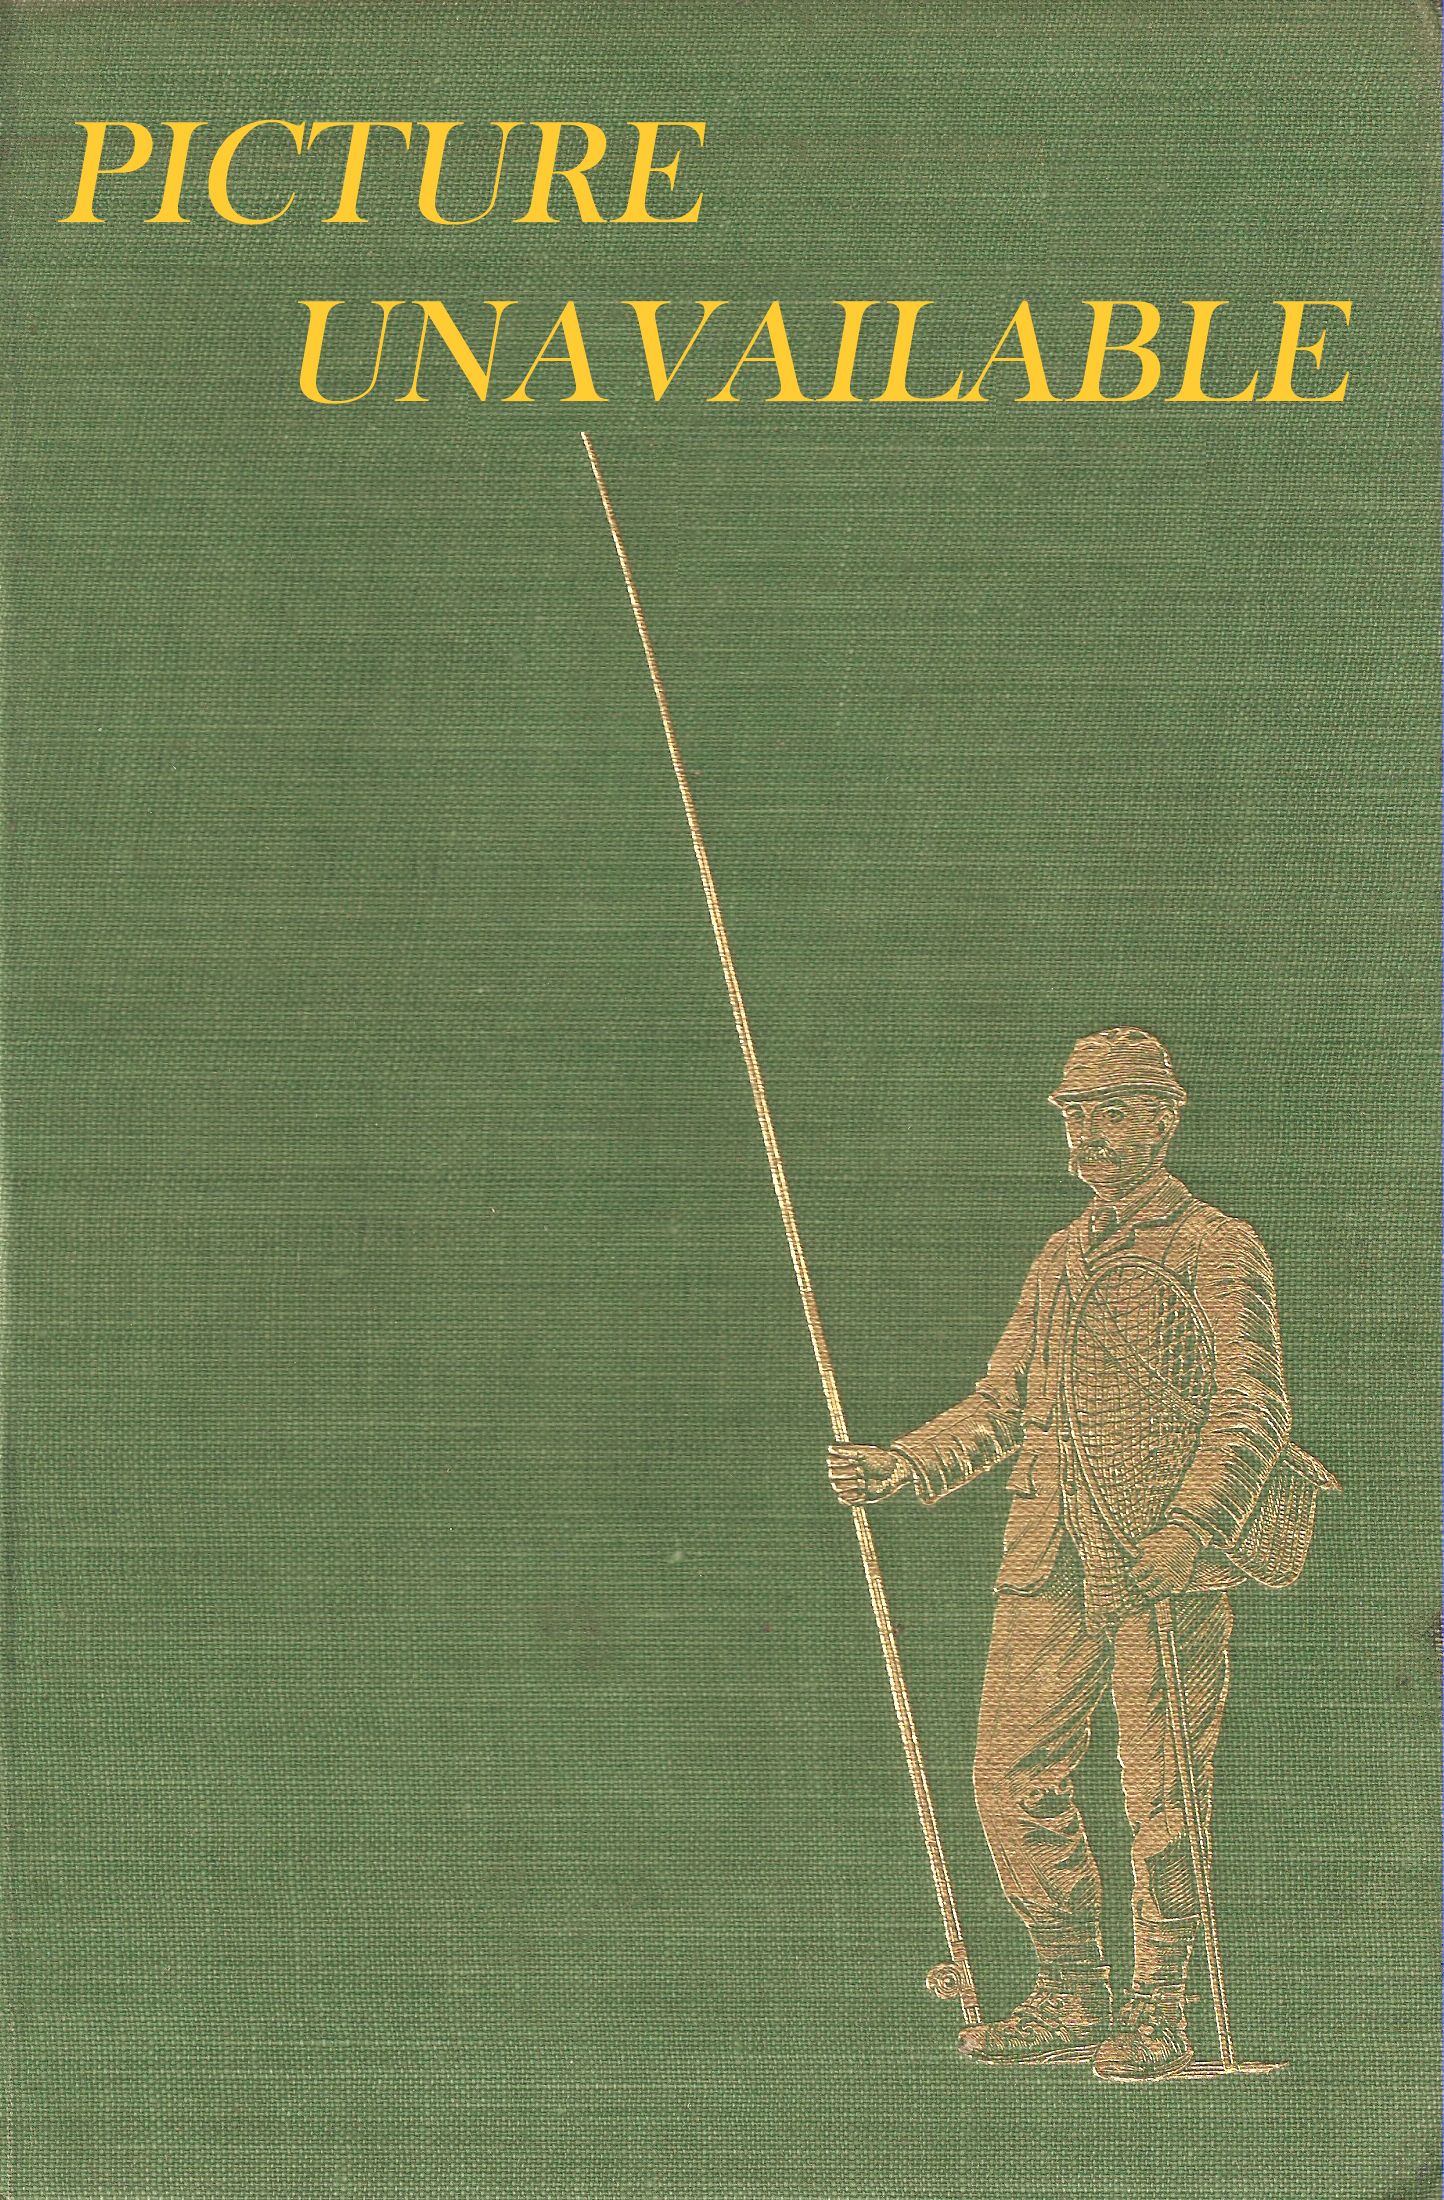 THE FISHERMAN'S VADE MECUM: A COMPENDIUM OF PRECEPTS, COUNSEL, KNOWLEDGE  AND EXPERIENCE IN MOST MATTERS PERTAINING TO FISHING IN MOST MATTERS  RELATING TO FISHING FOR TROUT, SEA TROUT, SALMON AND PIKE. By G.W.  Maunsell.